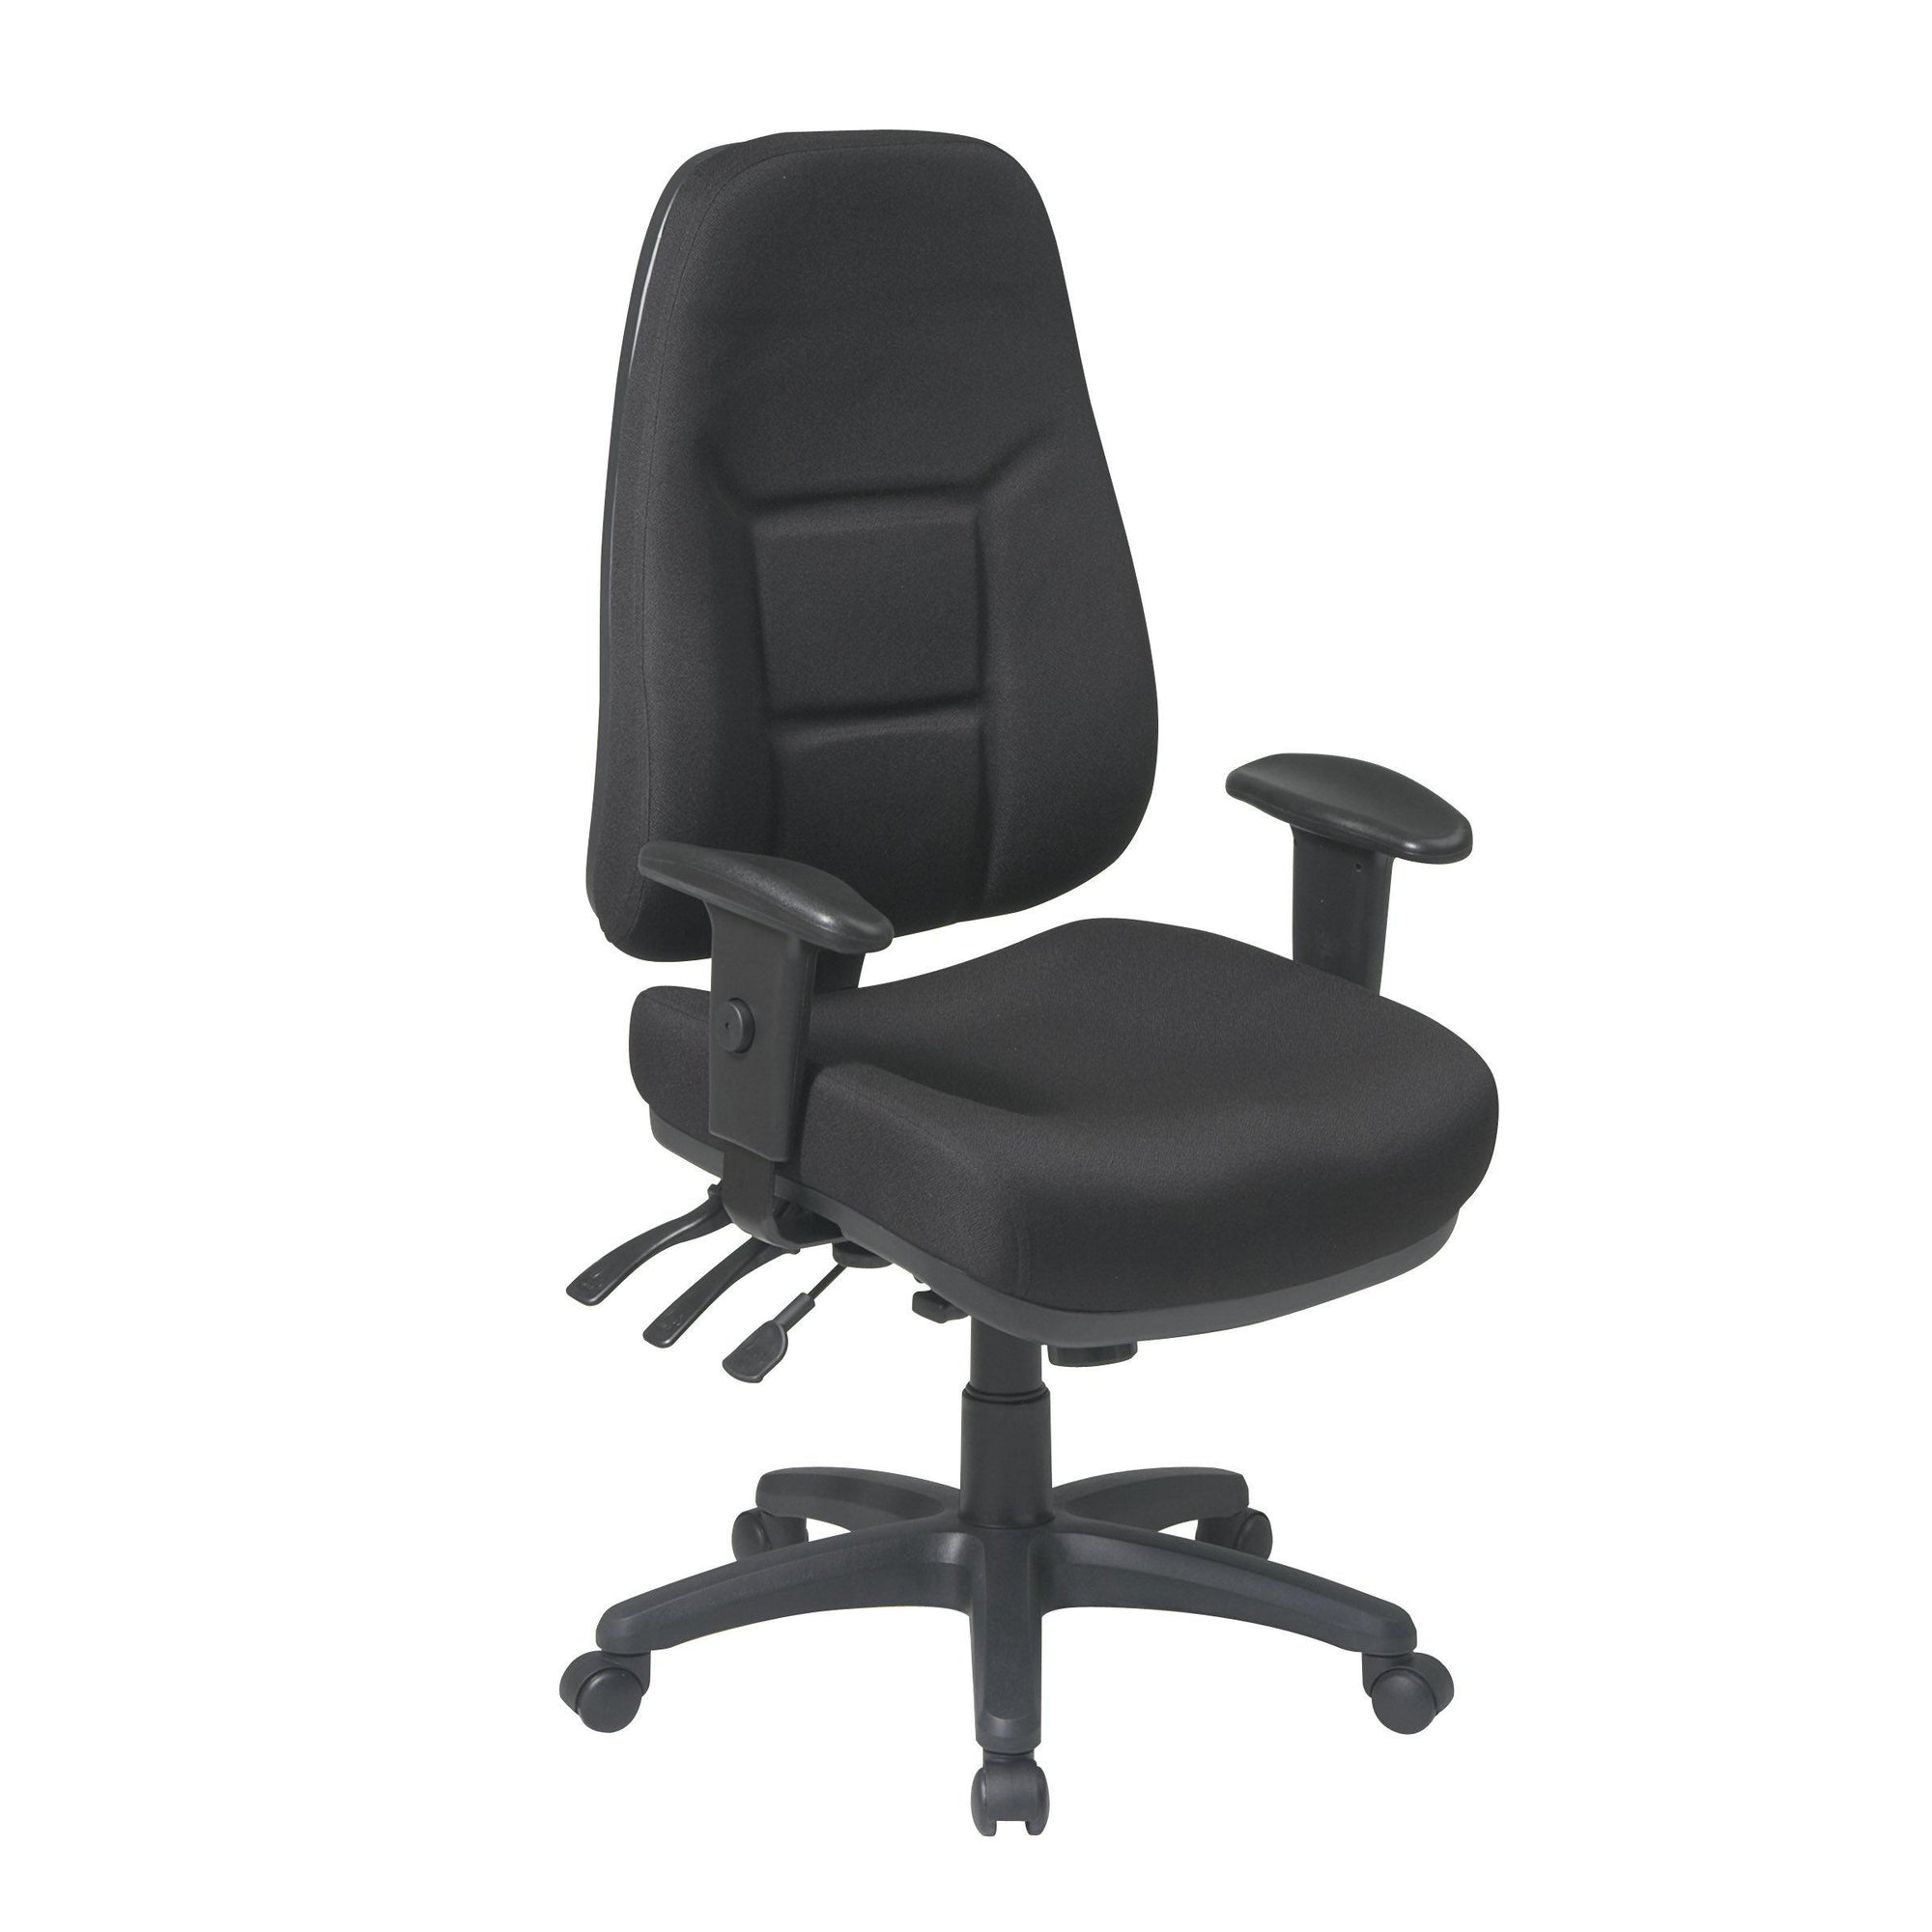 High Back Multi Function Ergonomic Chair with Ratchet Back Height Adjustment and 2-Way Adjustable Arms